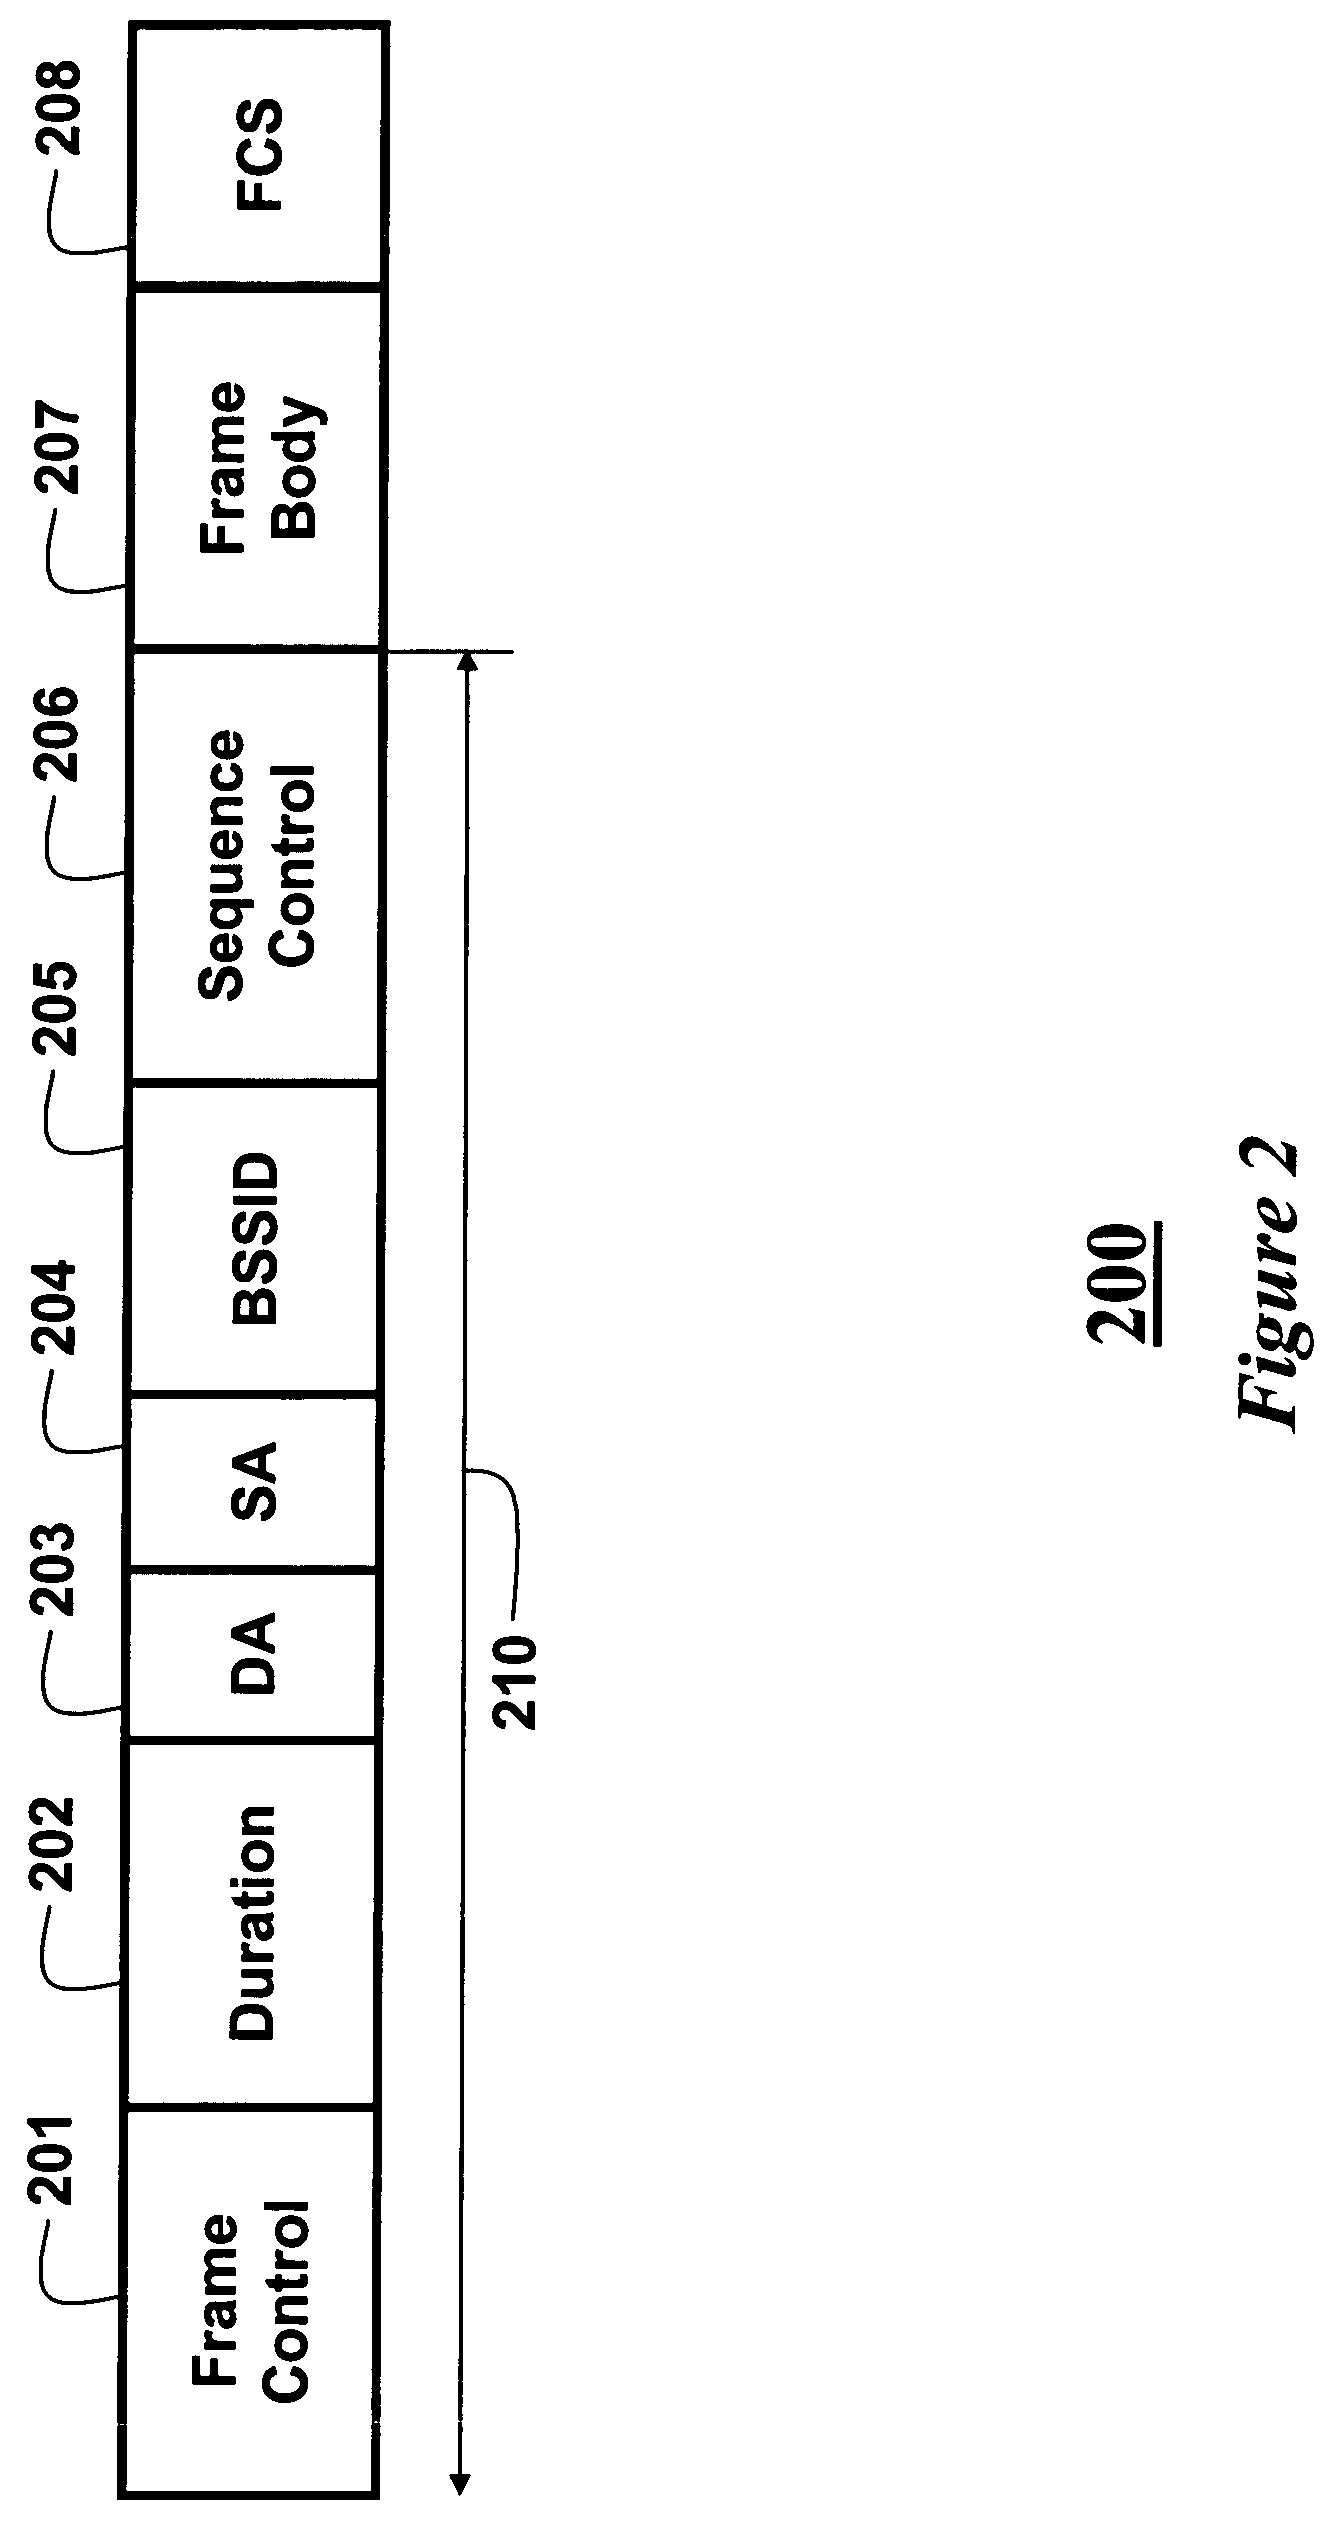 Signaling in a wireless network with sequential coordinated channel access